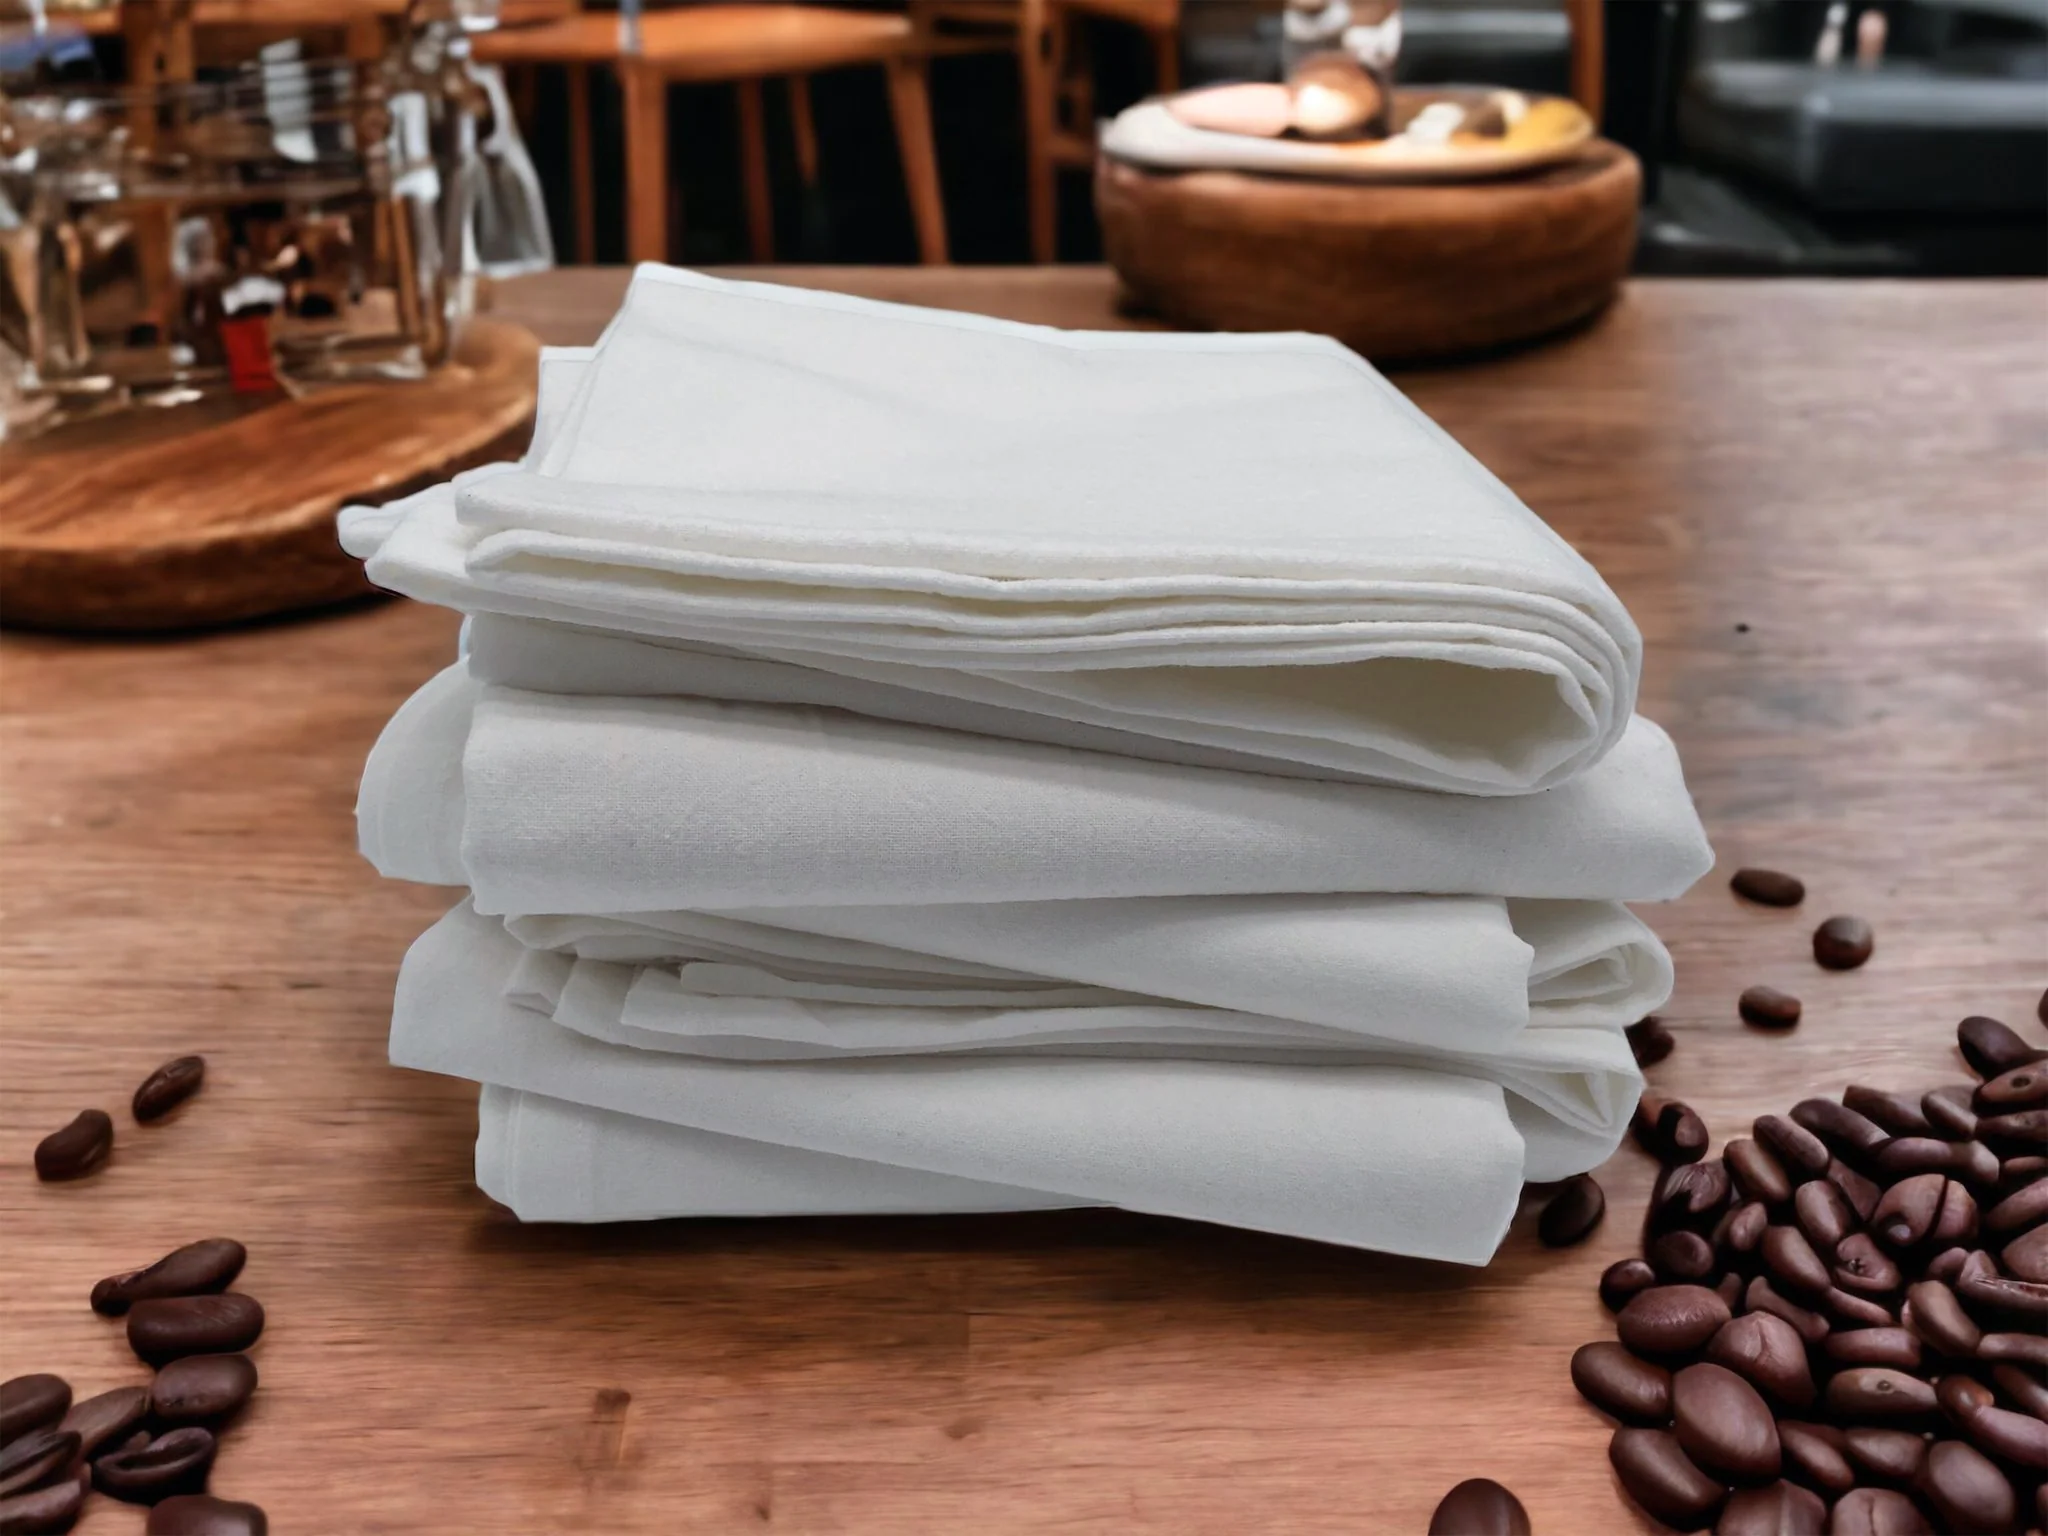 Flour sack towels as cheesecloth alternative